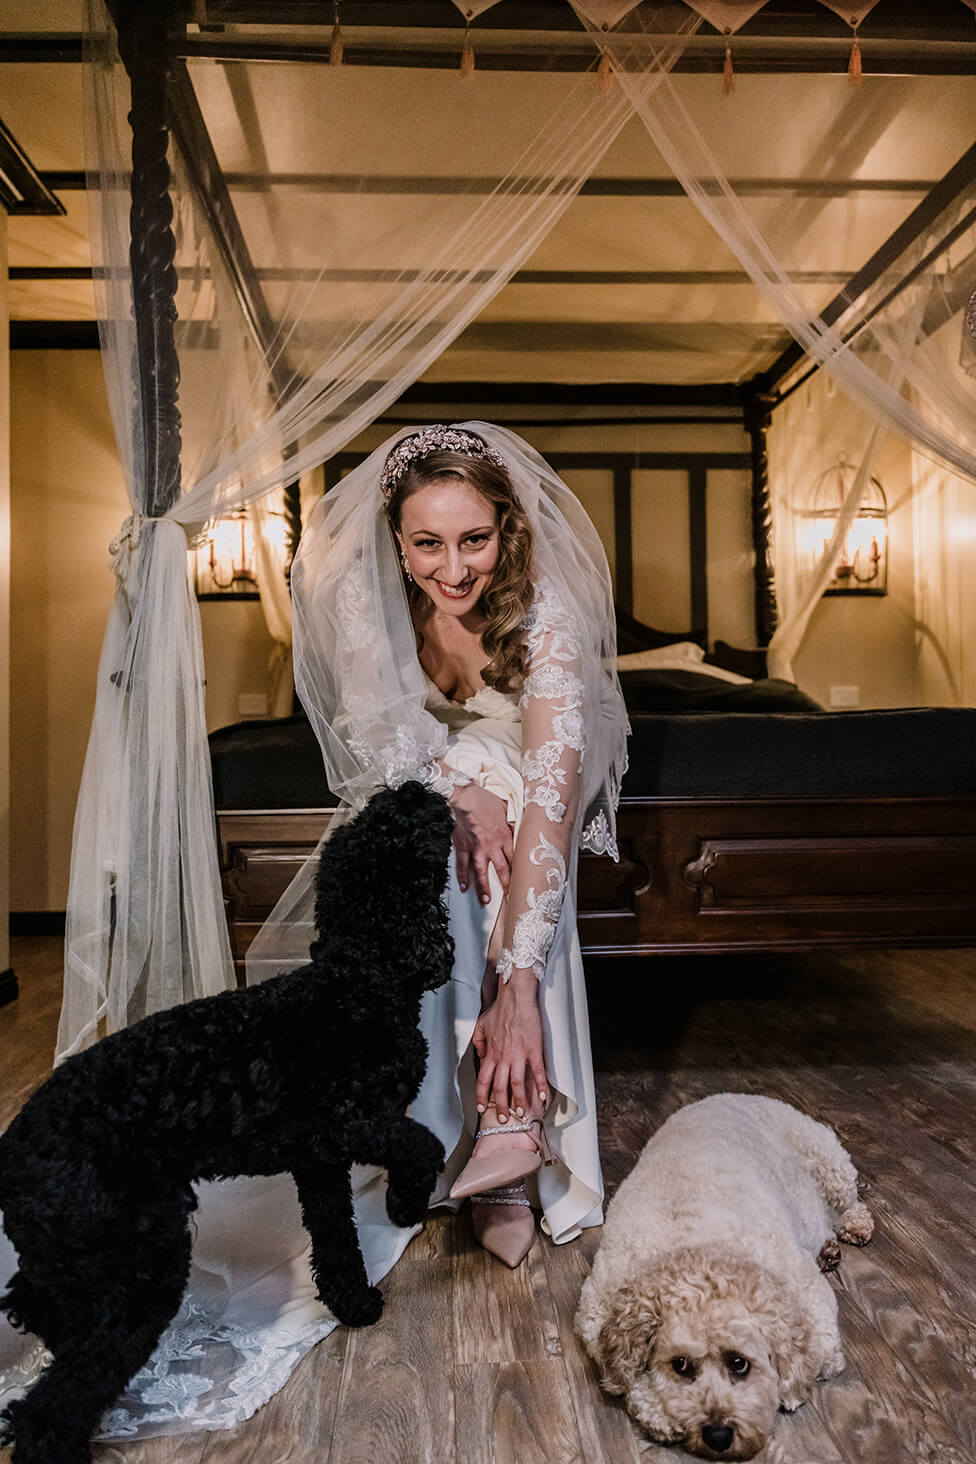 Awesome Ways to include your pet, bride poses with her lovely dogs by the bed, captured by Black Avenue Productions